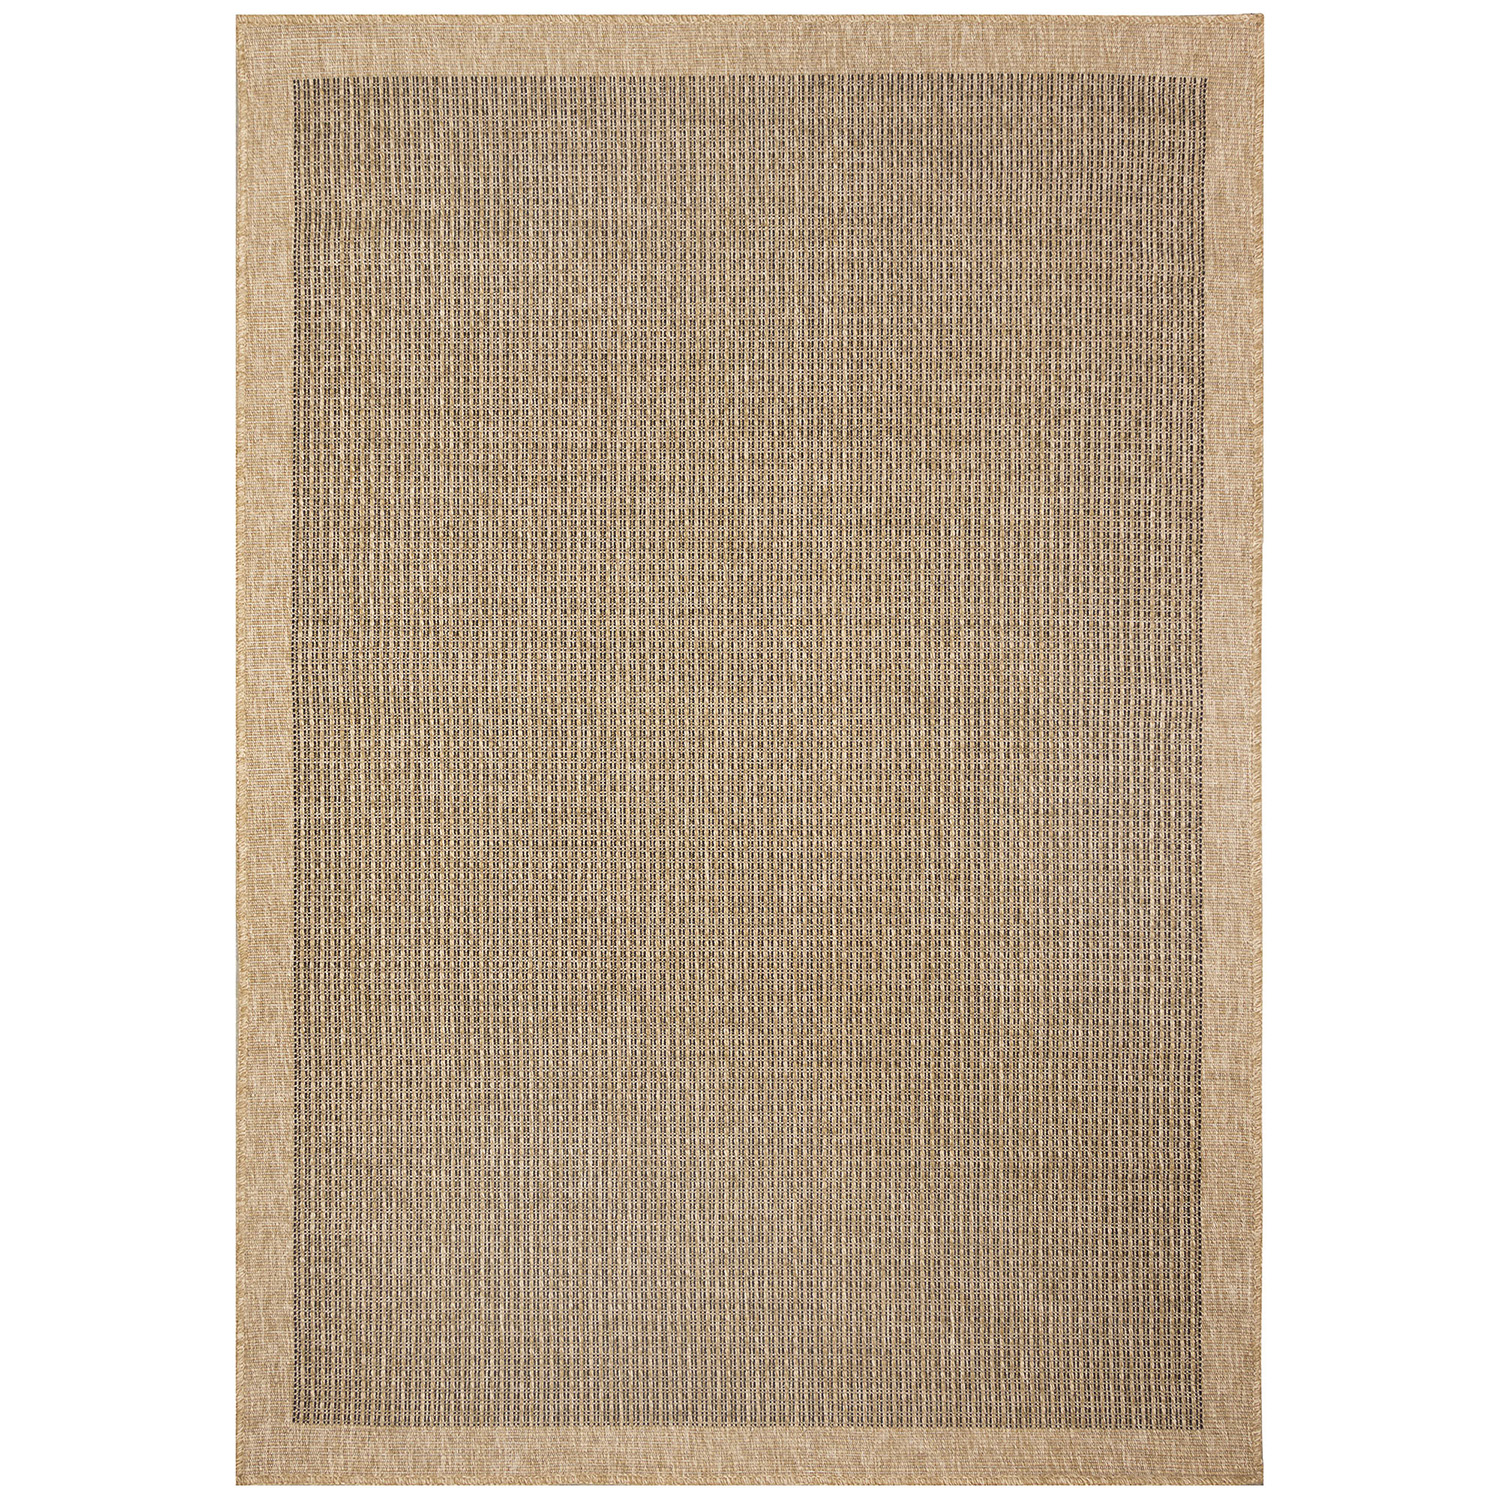 Liora Manne Sahara Low Profile  Easy Care Woven Weather Resistant Rug- Texture Border Natural  Product Image